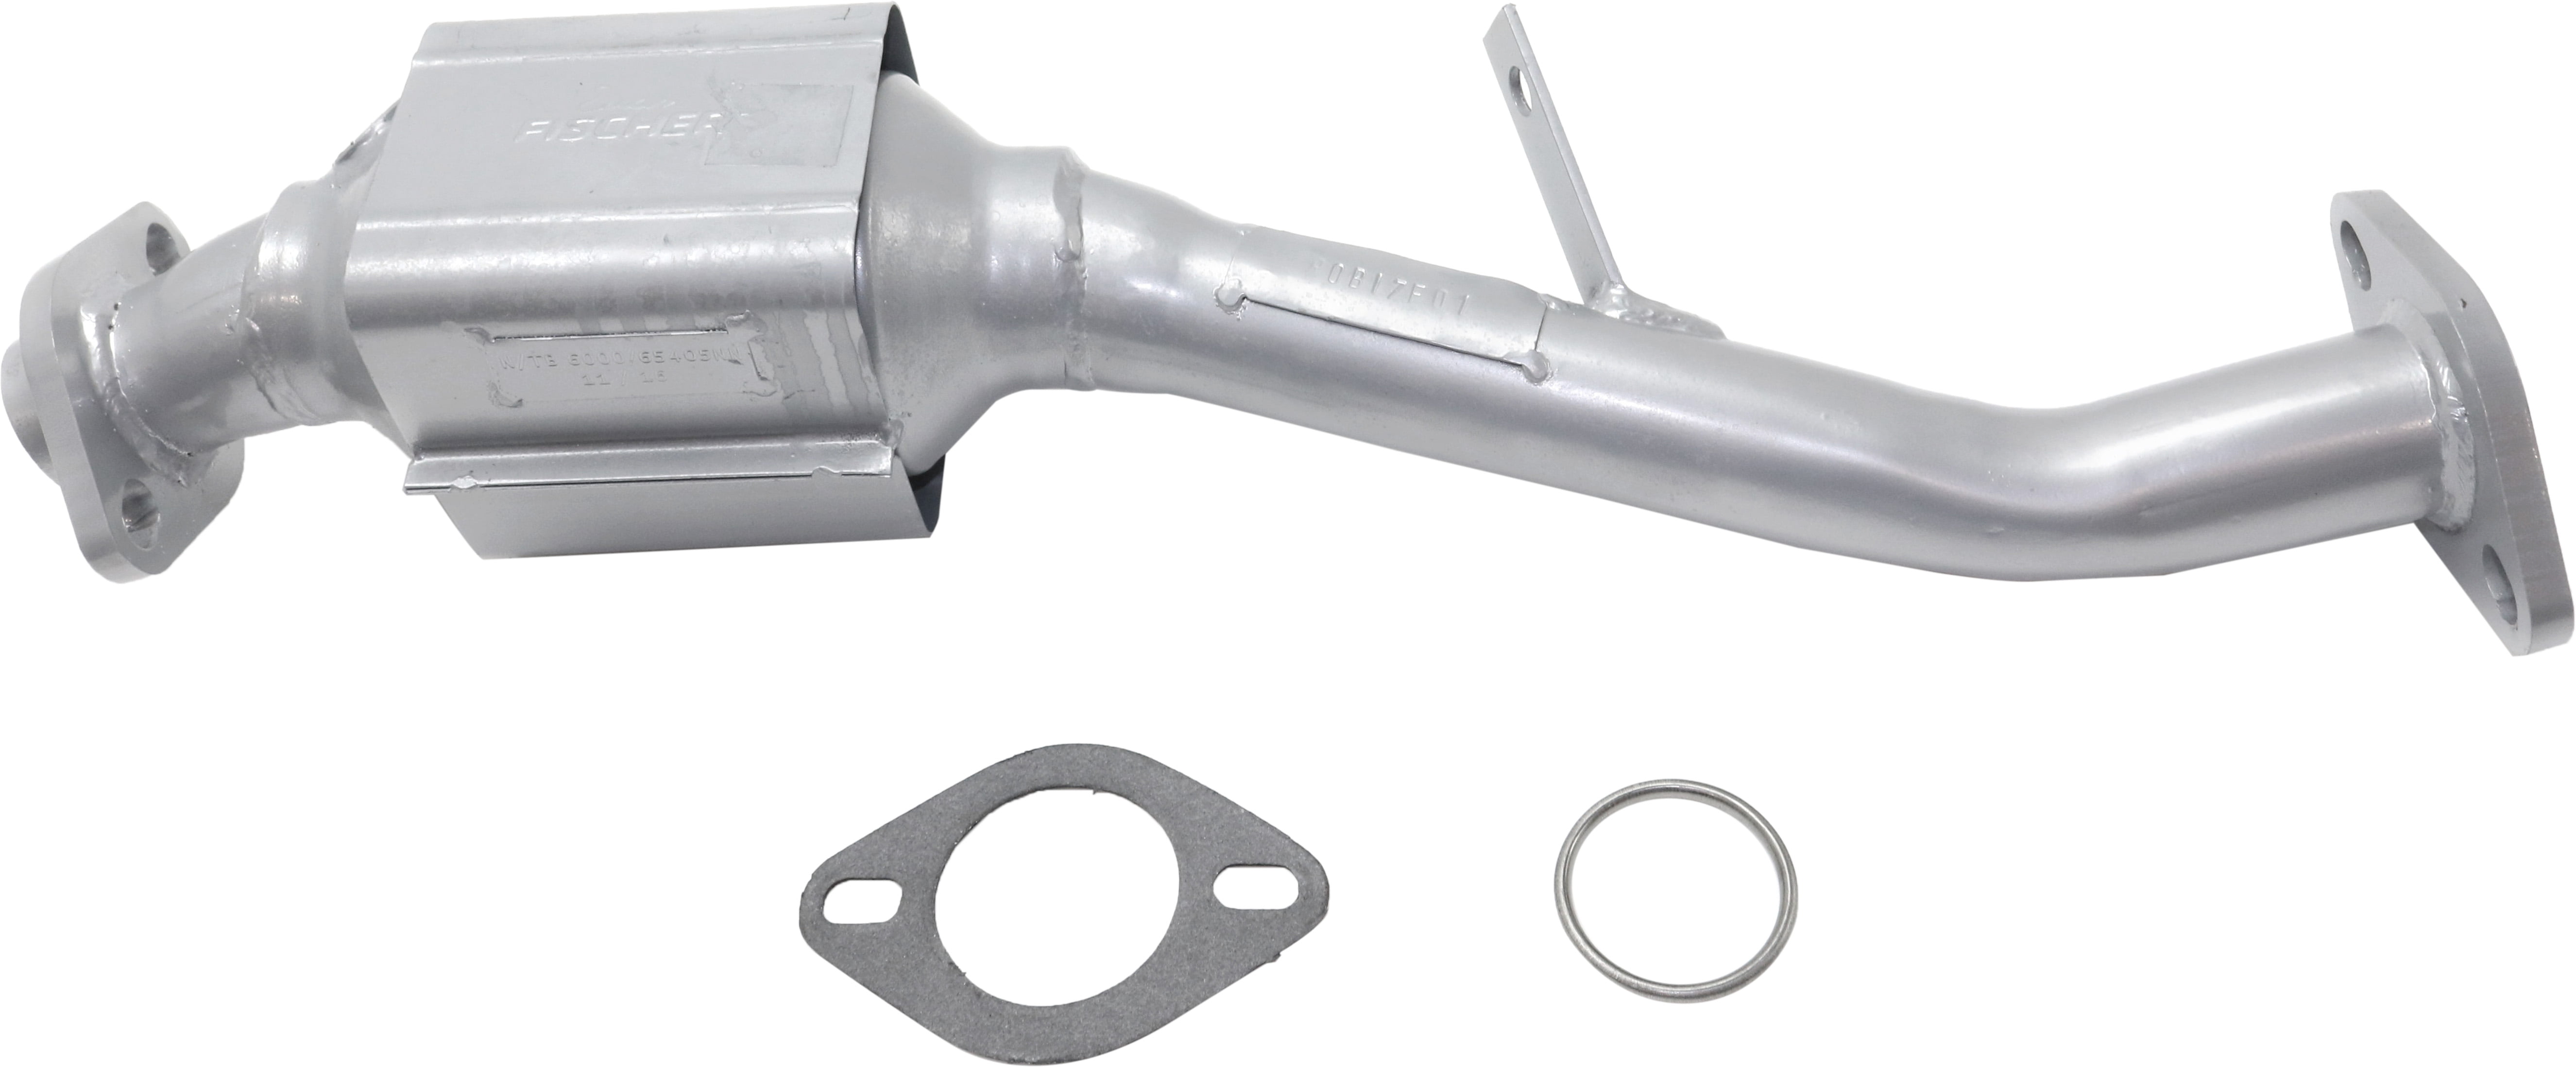 New Catalytic Converter For Expedition 2003-2004